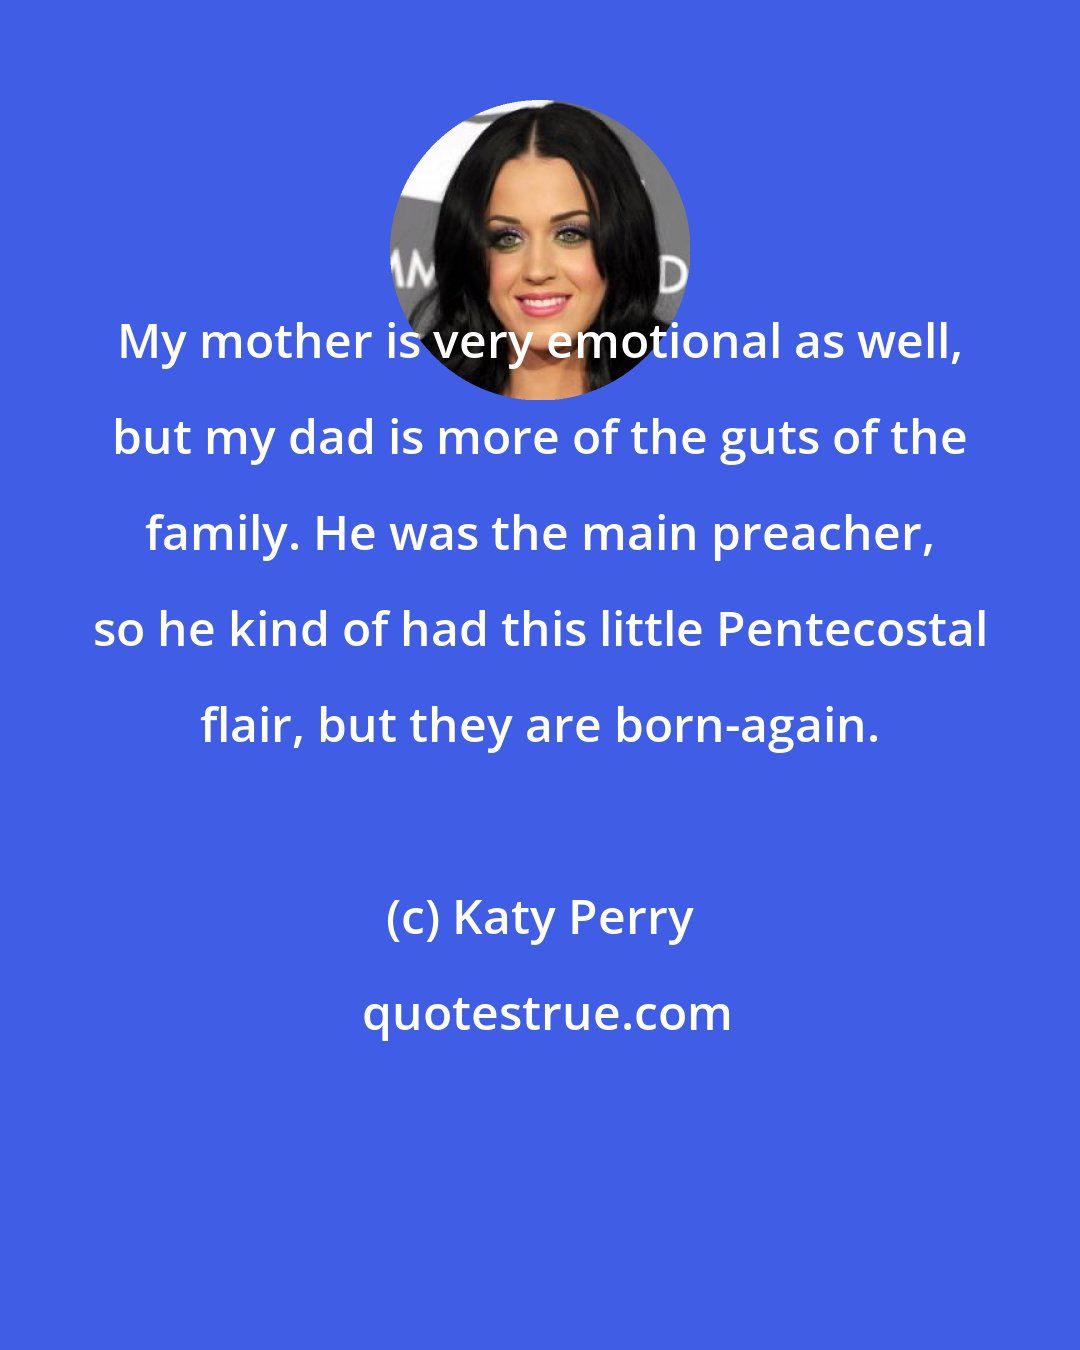 Katy Perry: My mother is very emotional as well, but my dad is more of the guts of the family. He was the main preacher, so he kind of had this little Pentecostal flair, but they are born-again.